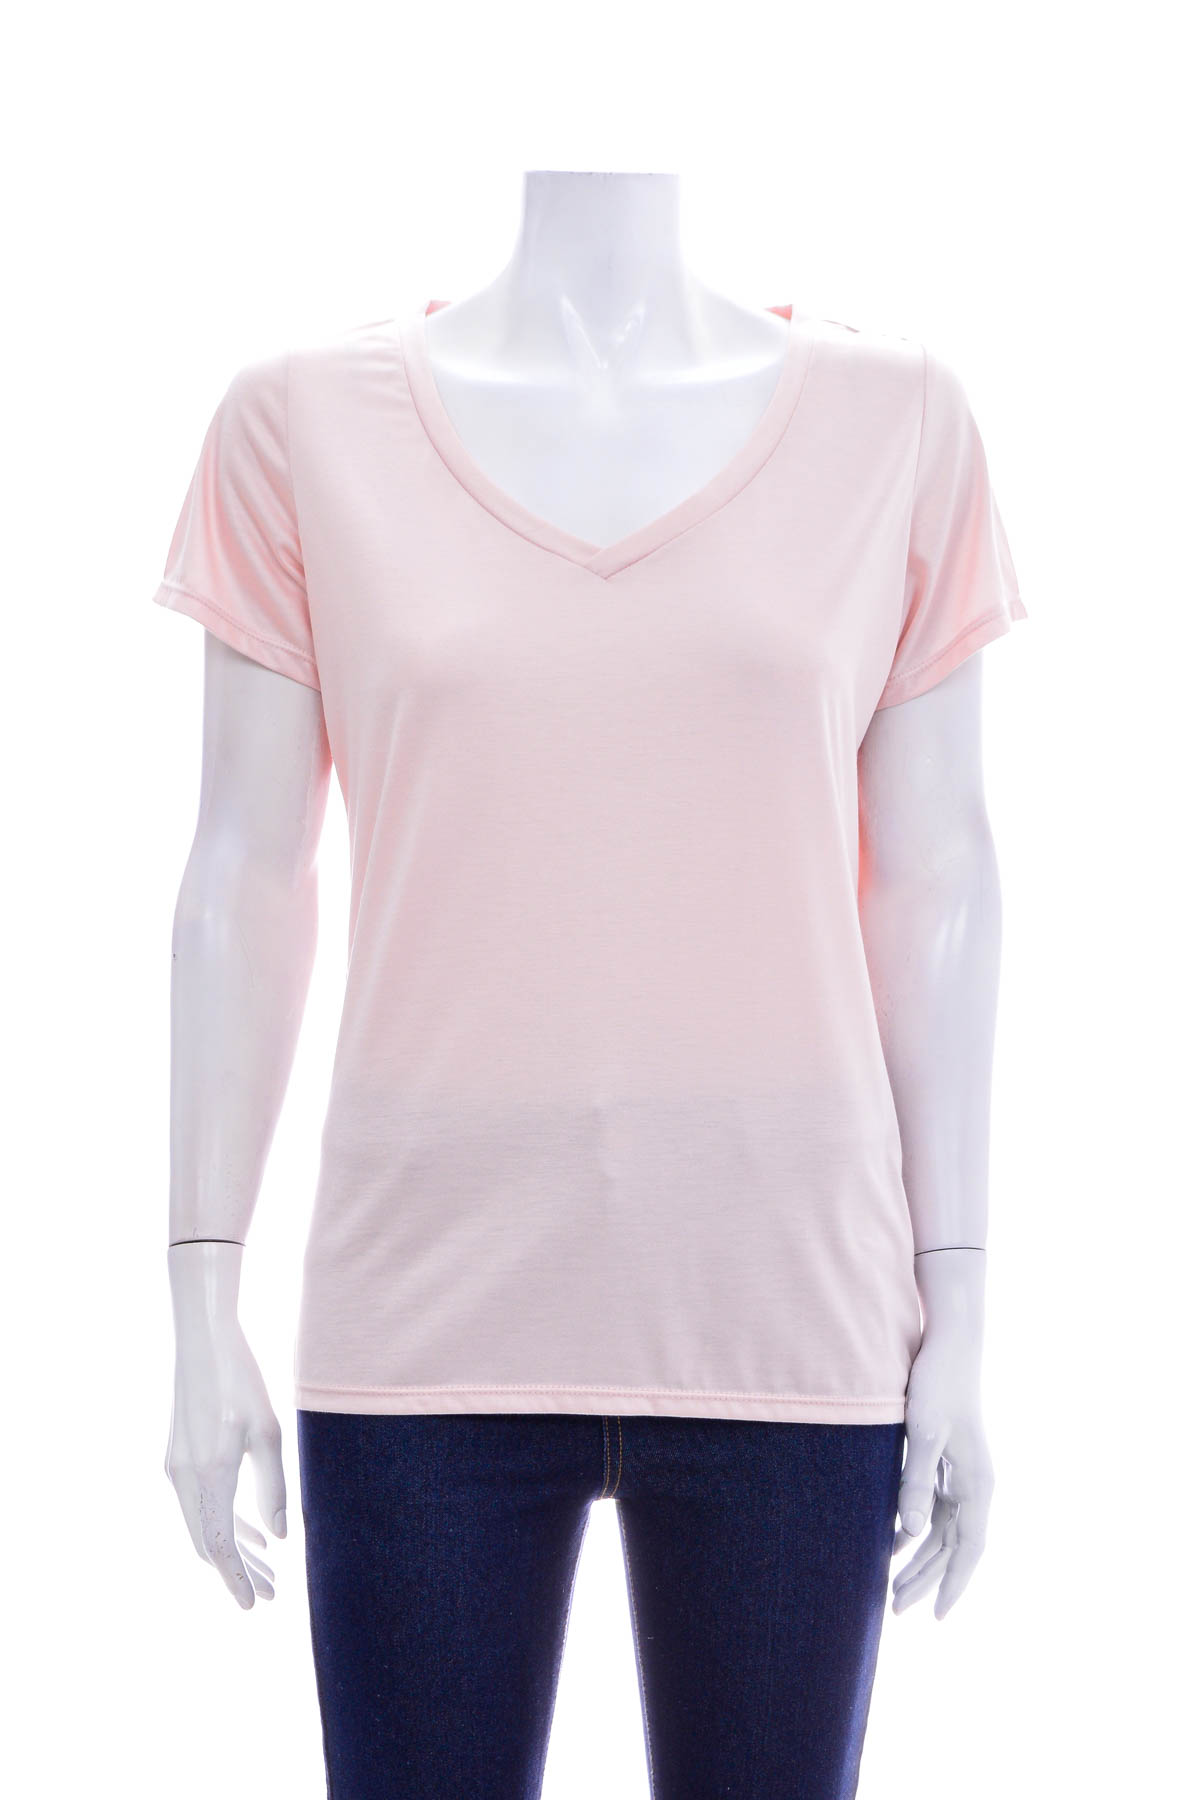 Women's shirt - Active LIMITED by Tchibo - 0